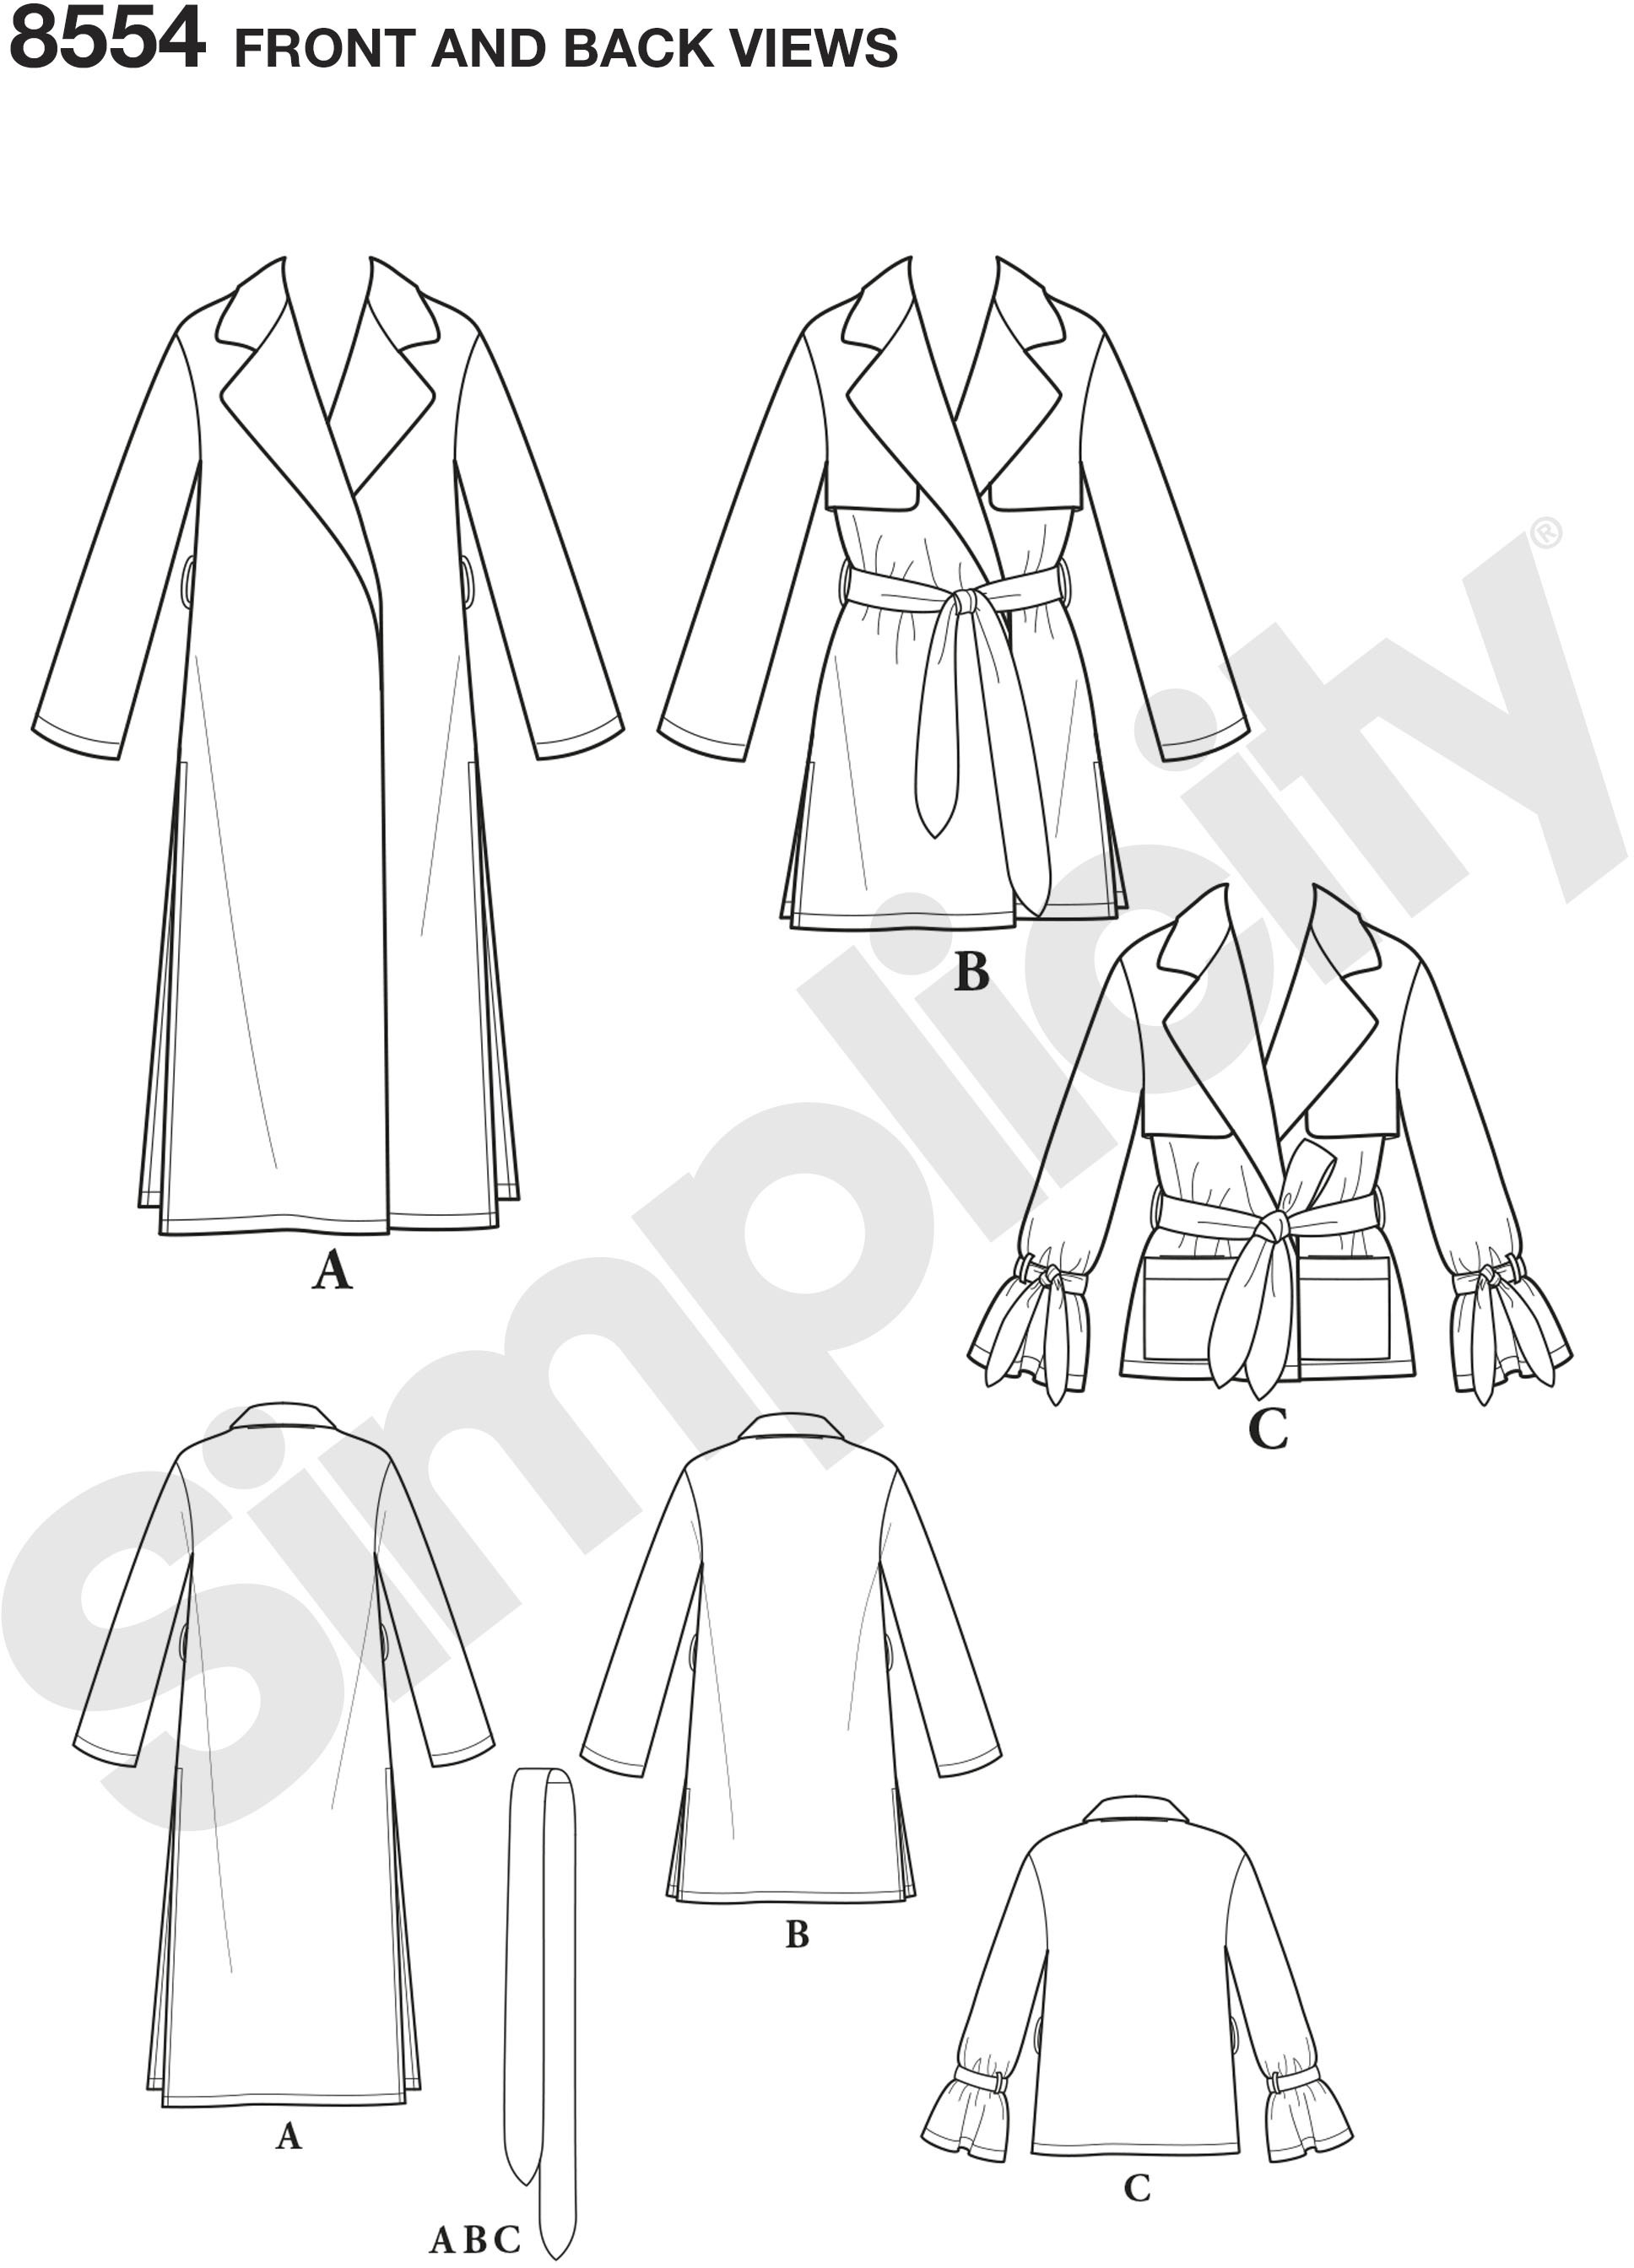 In this Simplicity pattern sized for Misses and Miss Petite, our easy-to-sew soft trenchcoat and jacket are the perfect layering pieces. Length options include short, mid, and long with side slits and optional pockets and ties.